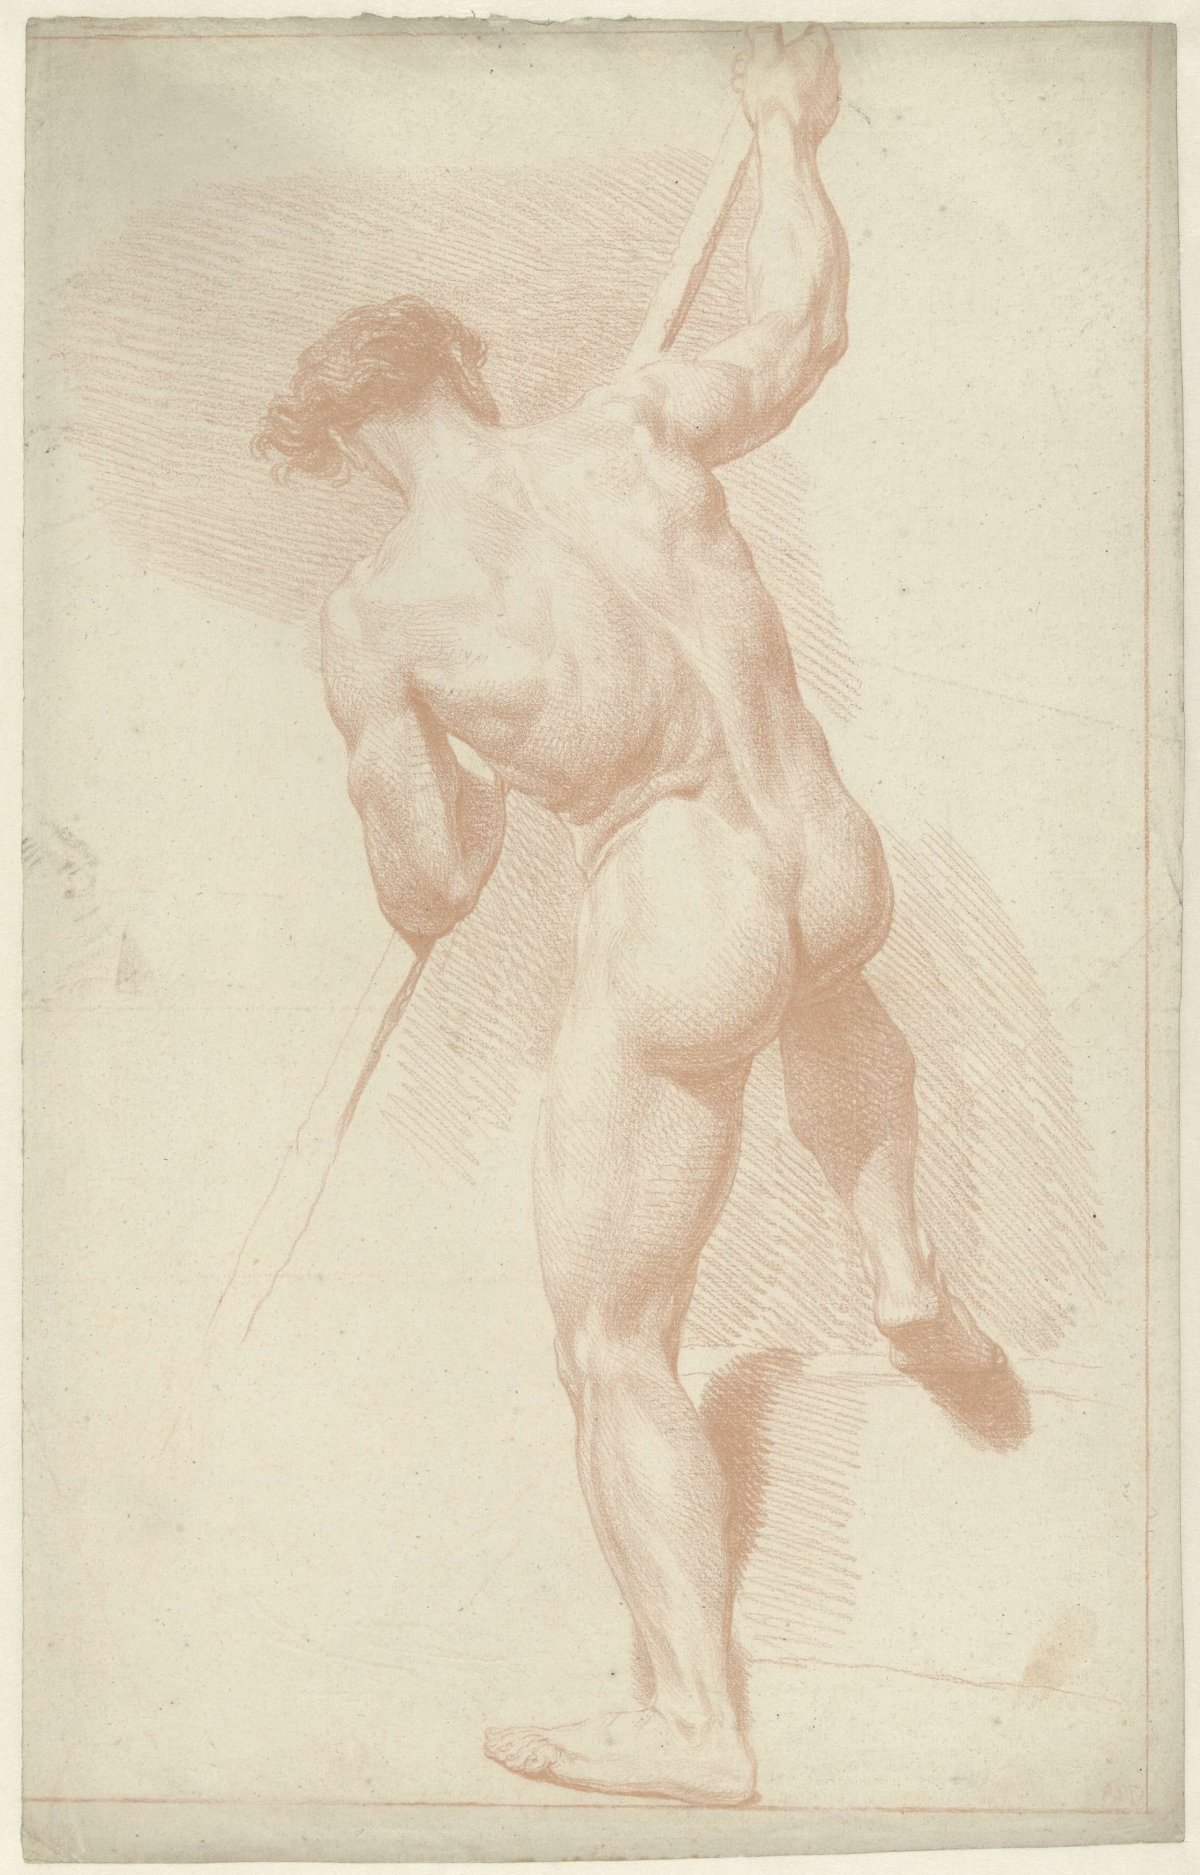 Male nude, standing, viewed from the back, Louis Fabritius Dubourg, 1703 - 1775